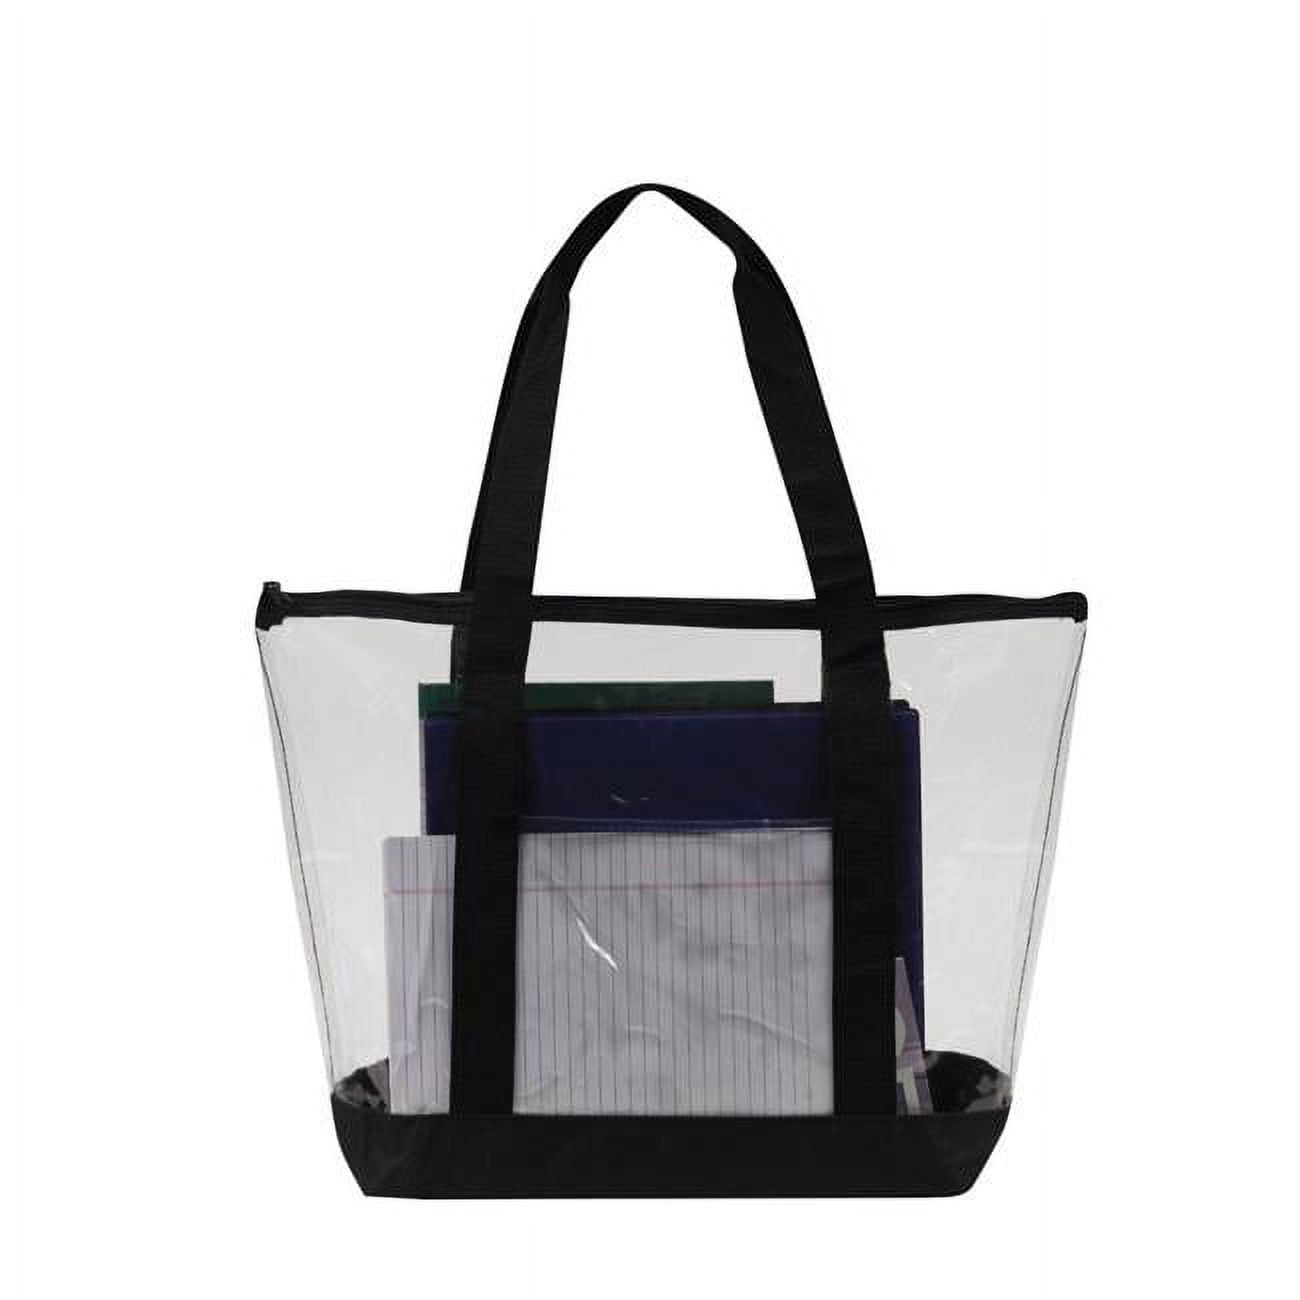 2326934 Clear Zipper Tote Security Bag With Pocket, Black - Case Of 50